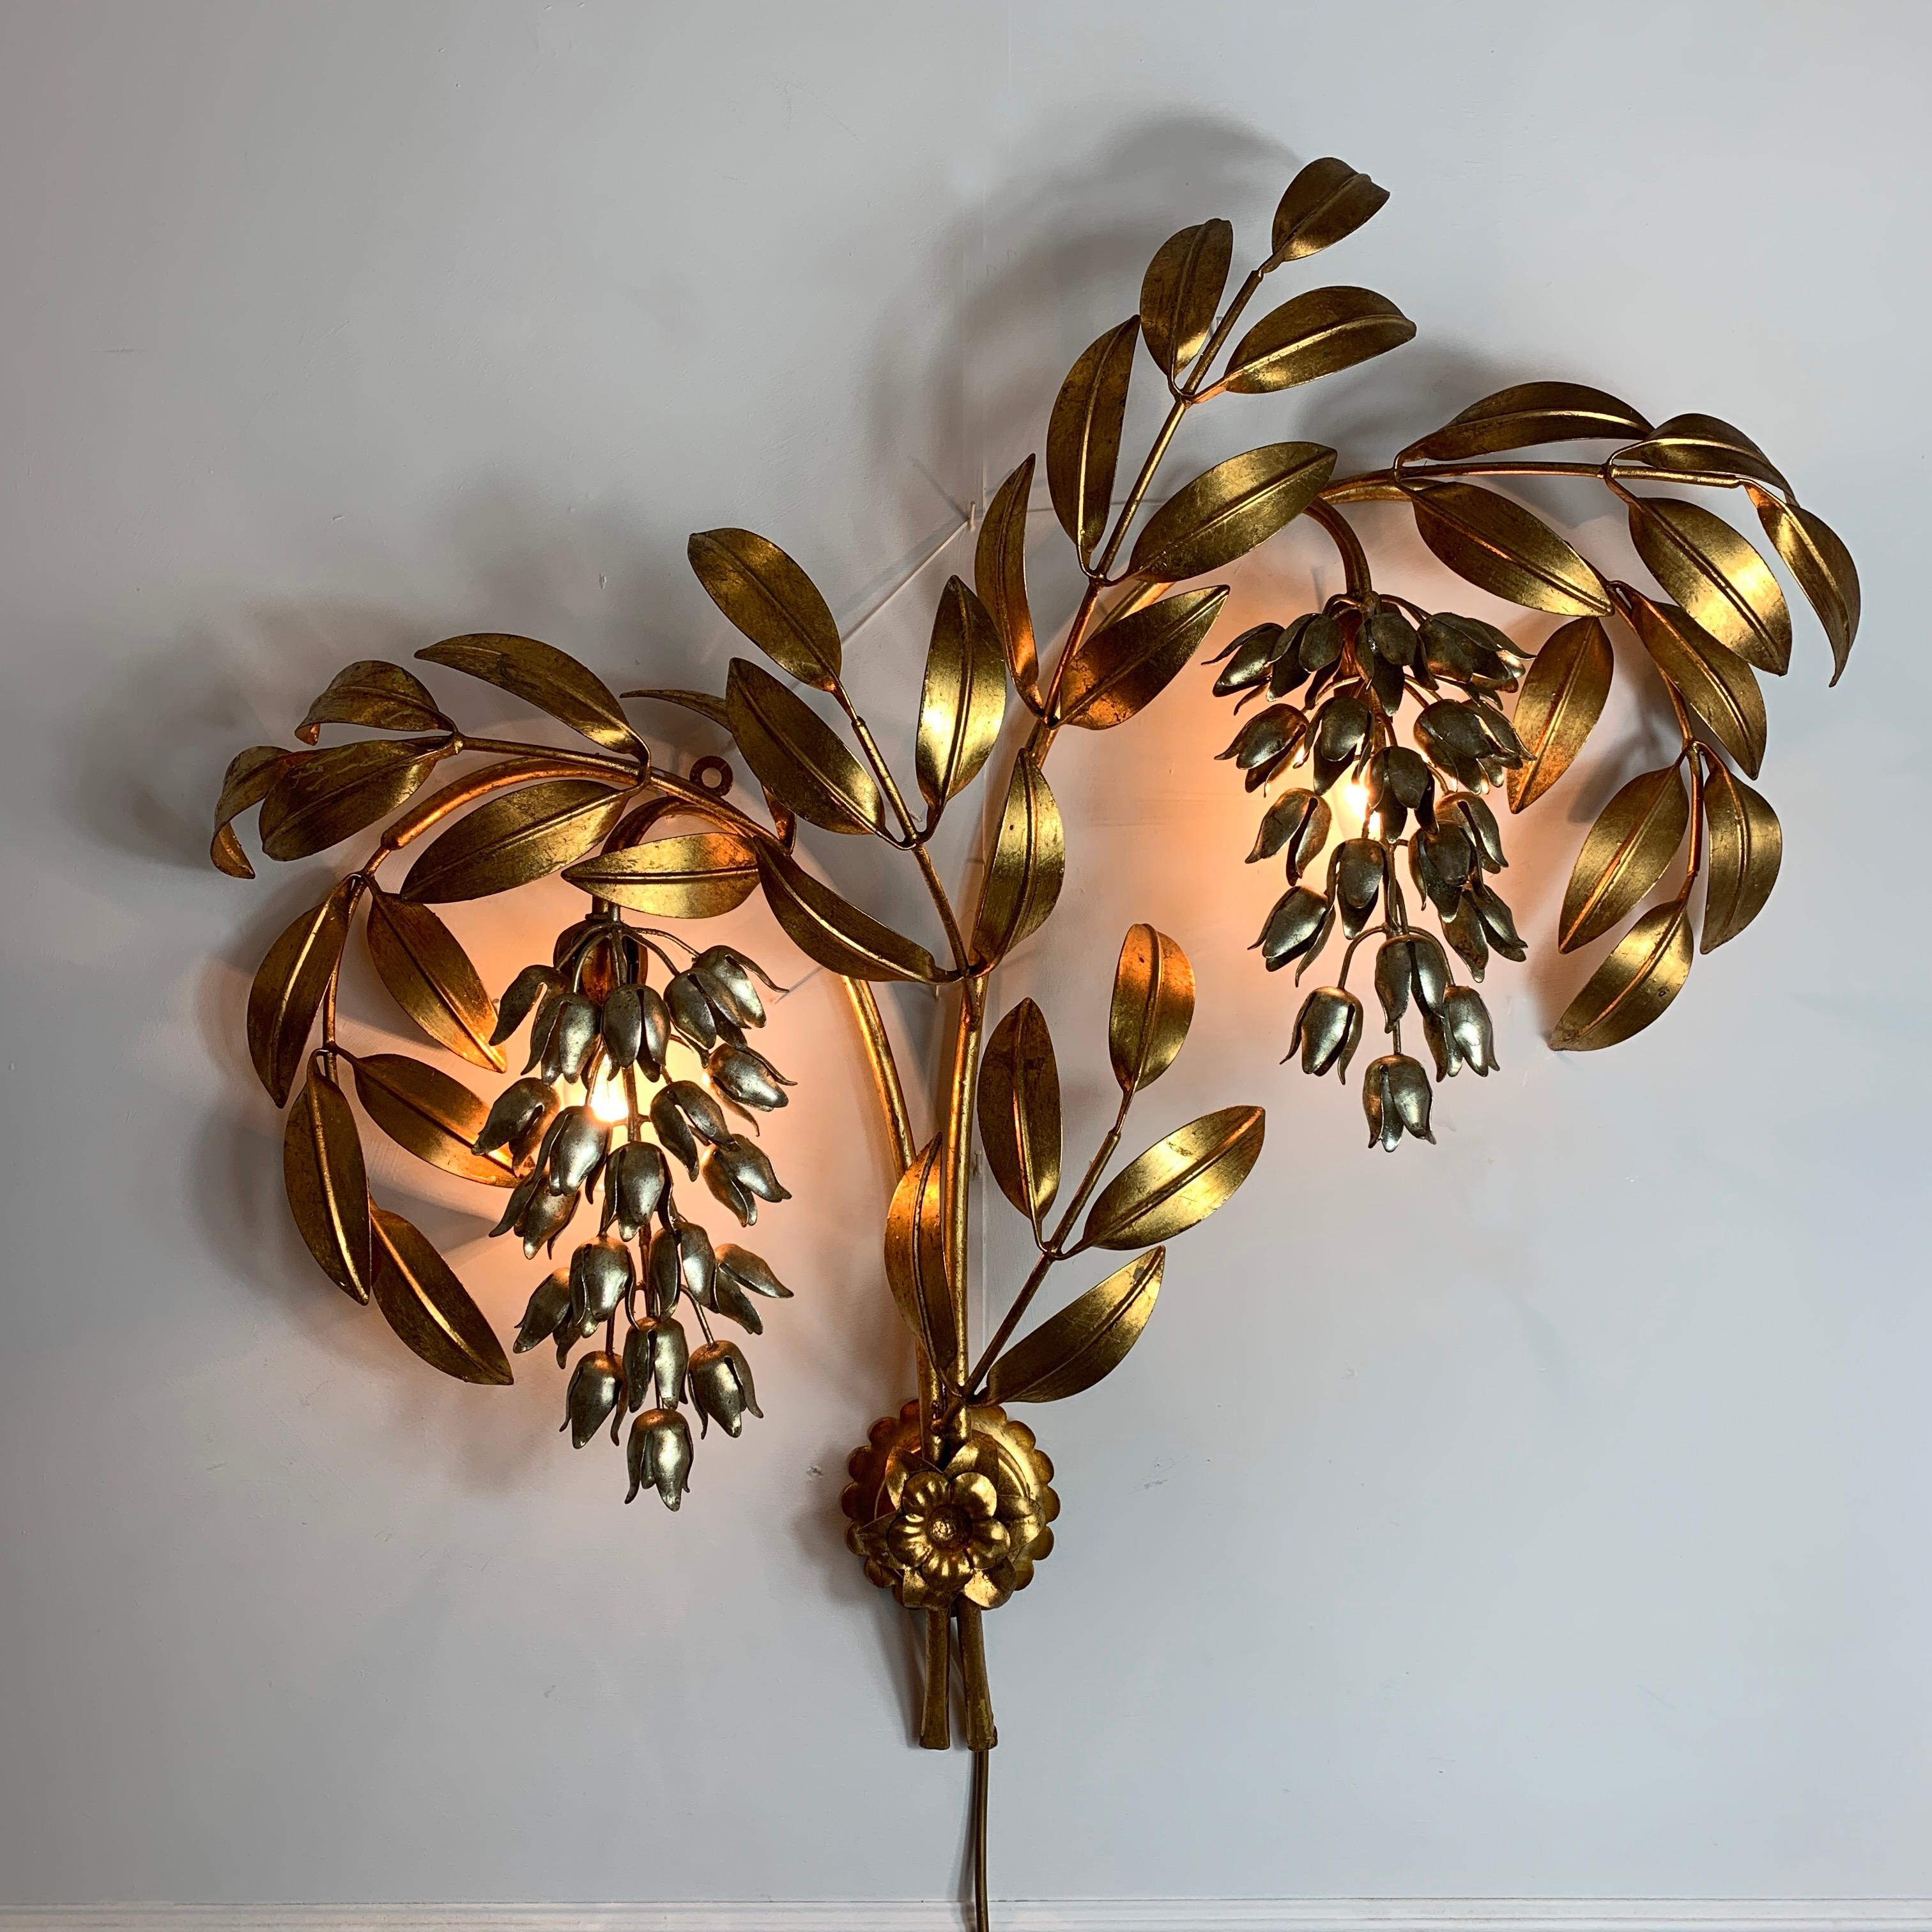 Monumental Hans Kögl Pioggia D'oro wall sconce
Large gold-plated leaved branches with hanging silver wisteria flowers
By the designer Hans Kögl

The sconce takes 2 single E14 bulbs, hidden behind each of the silver flowers
circa 1970s
Measures: 78cm